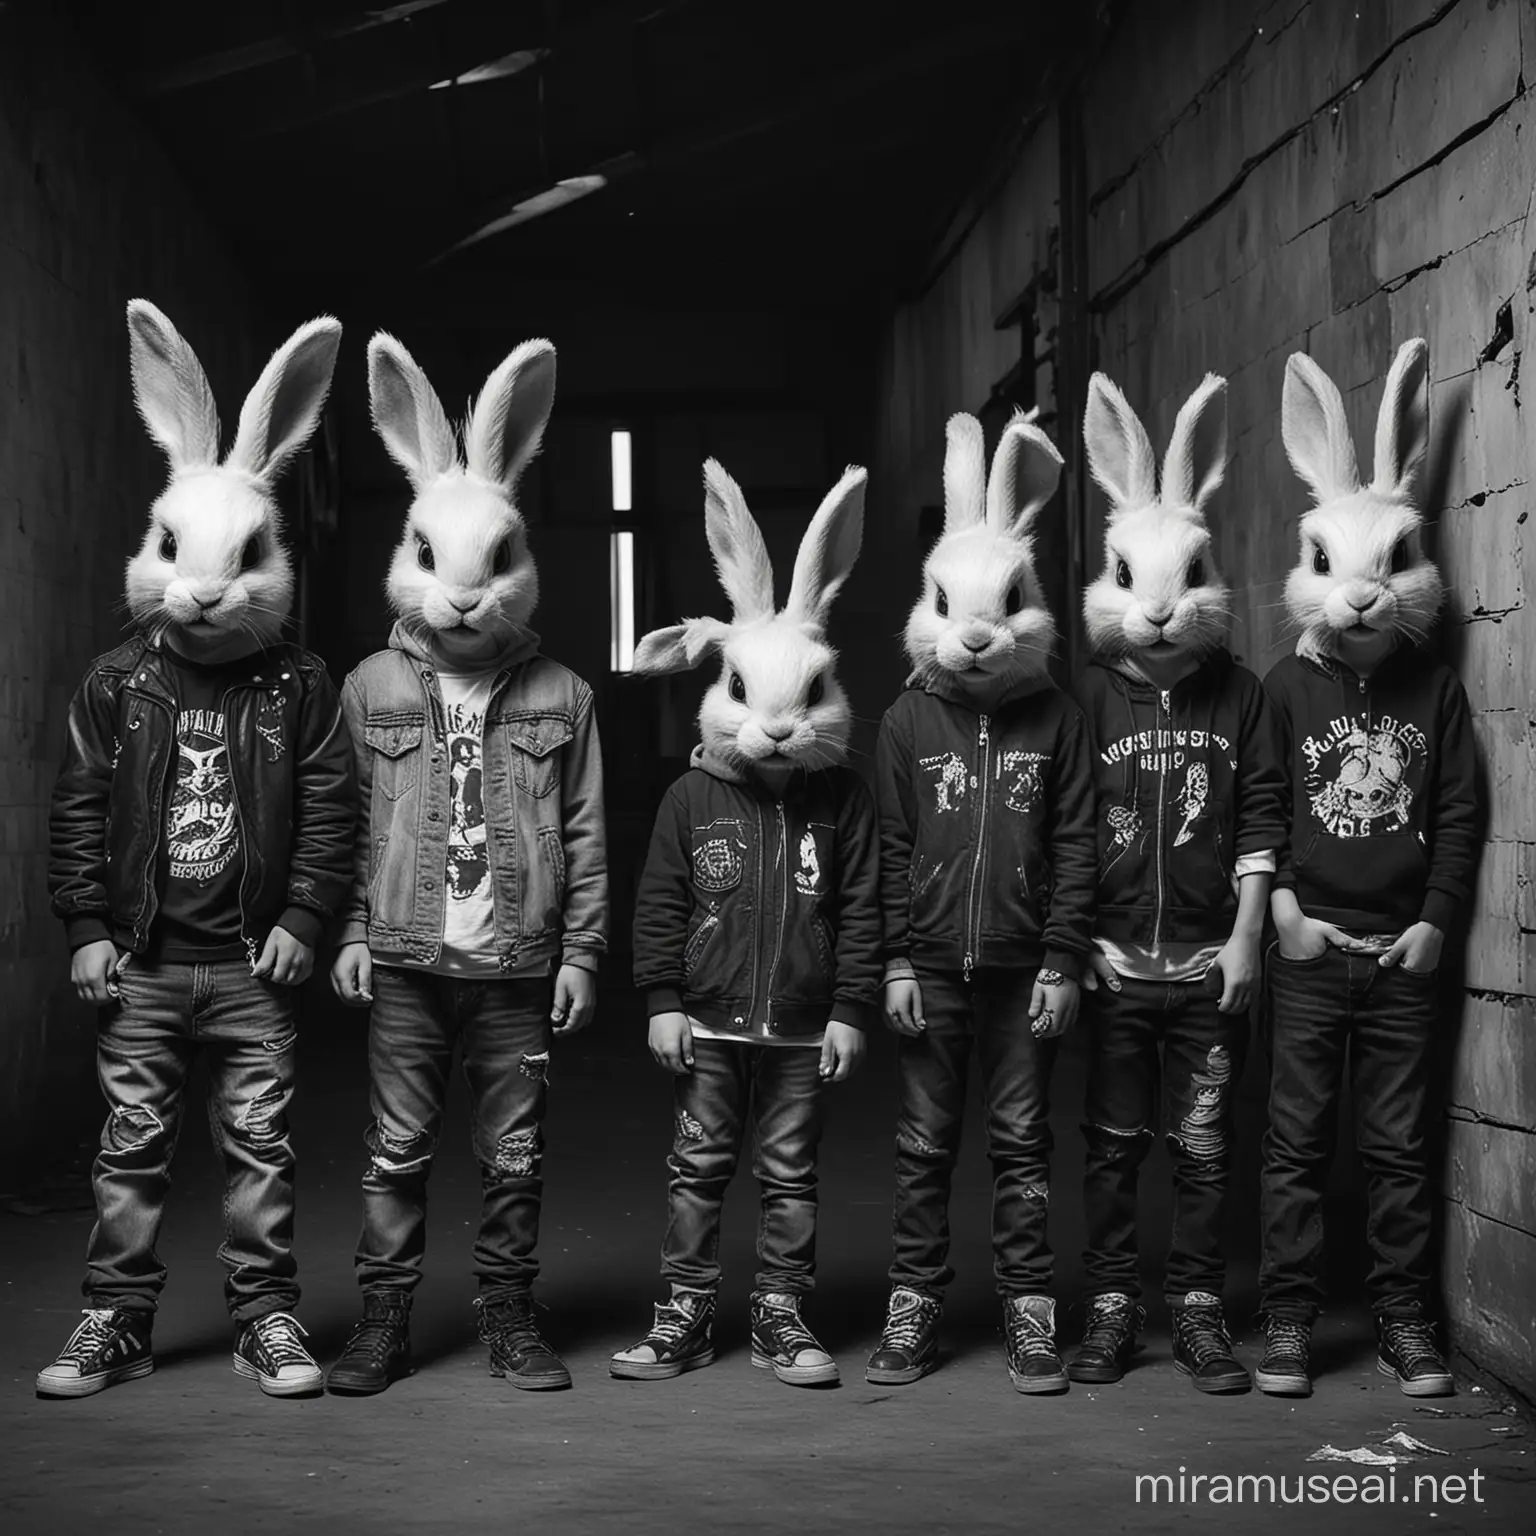 RabbitHeaded Punk Kids in Vintage Garage Haunting Black and White Portrait